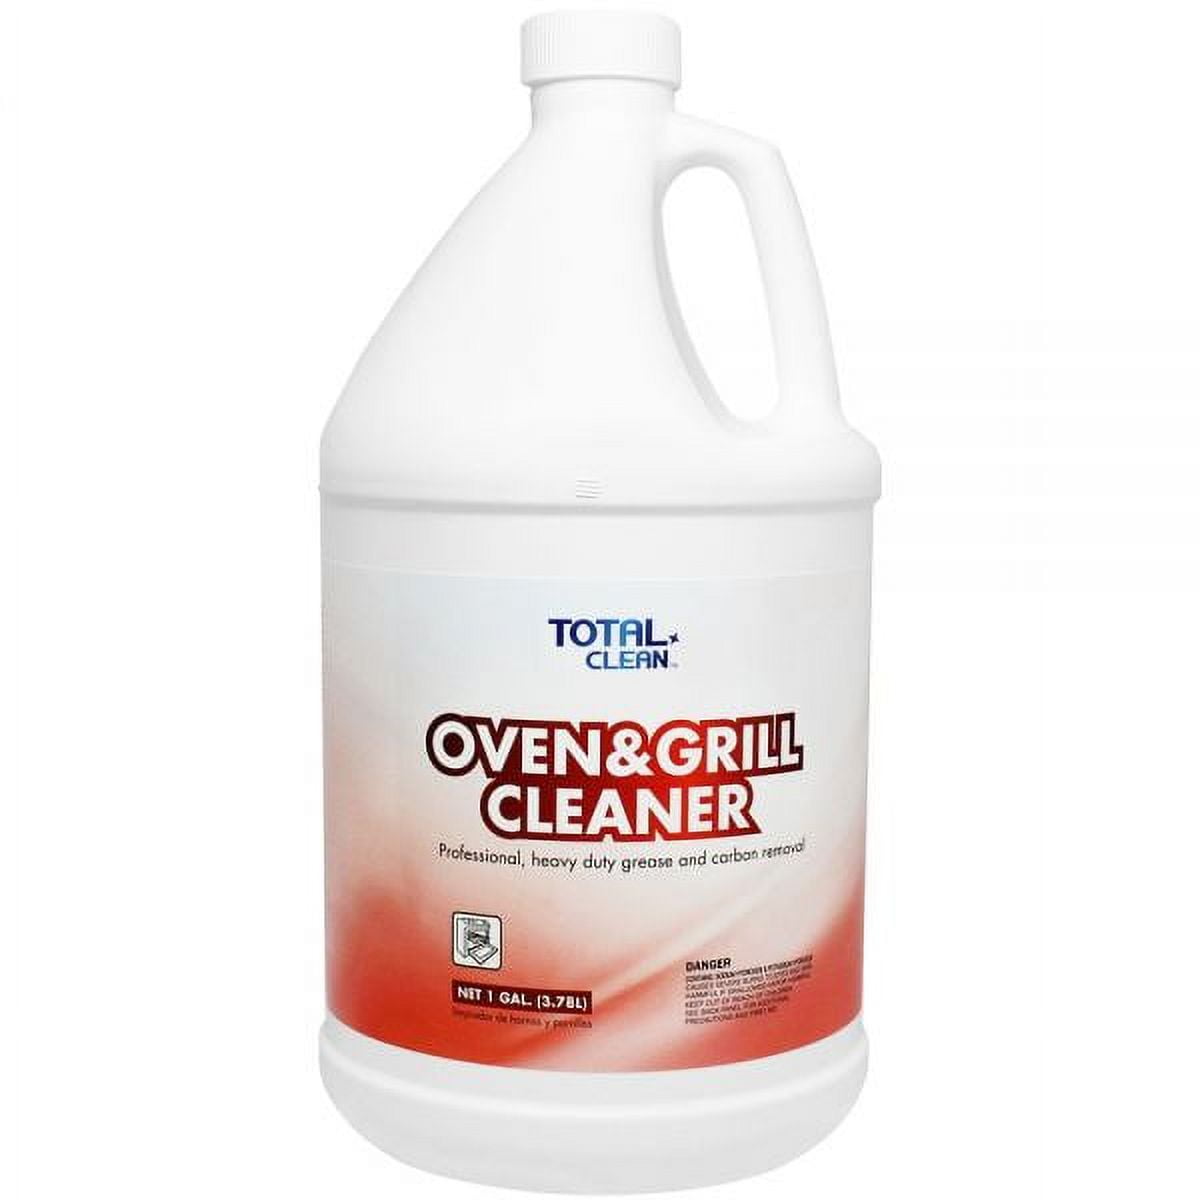 Oven Whiz Concentrated Oven & Grill Cleaner 1 Gal - Incl. 2x Spray Bottles